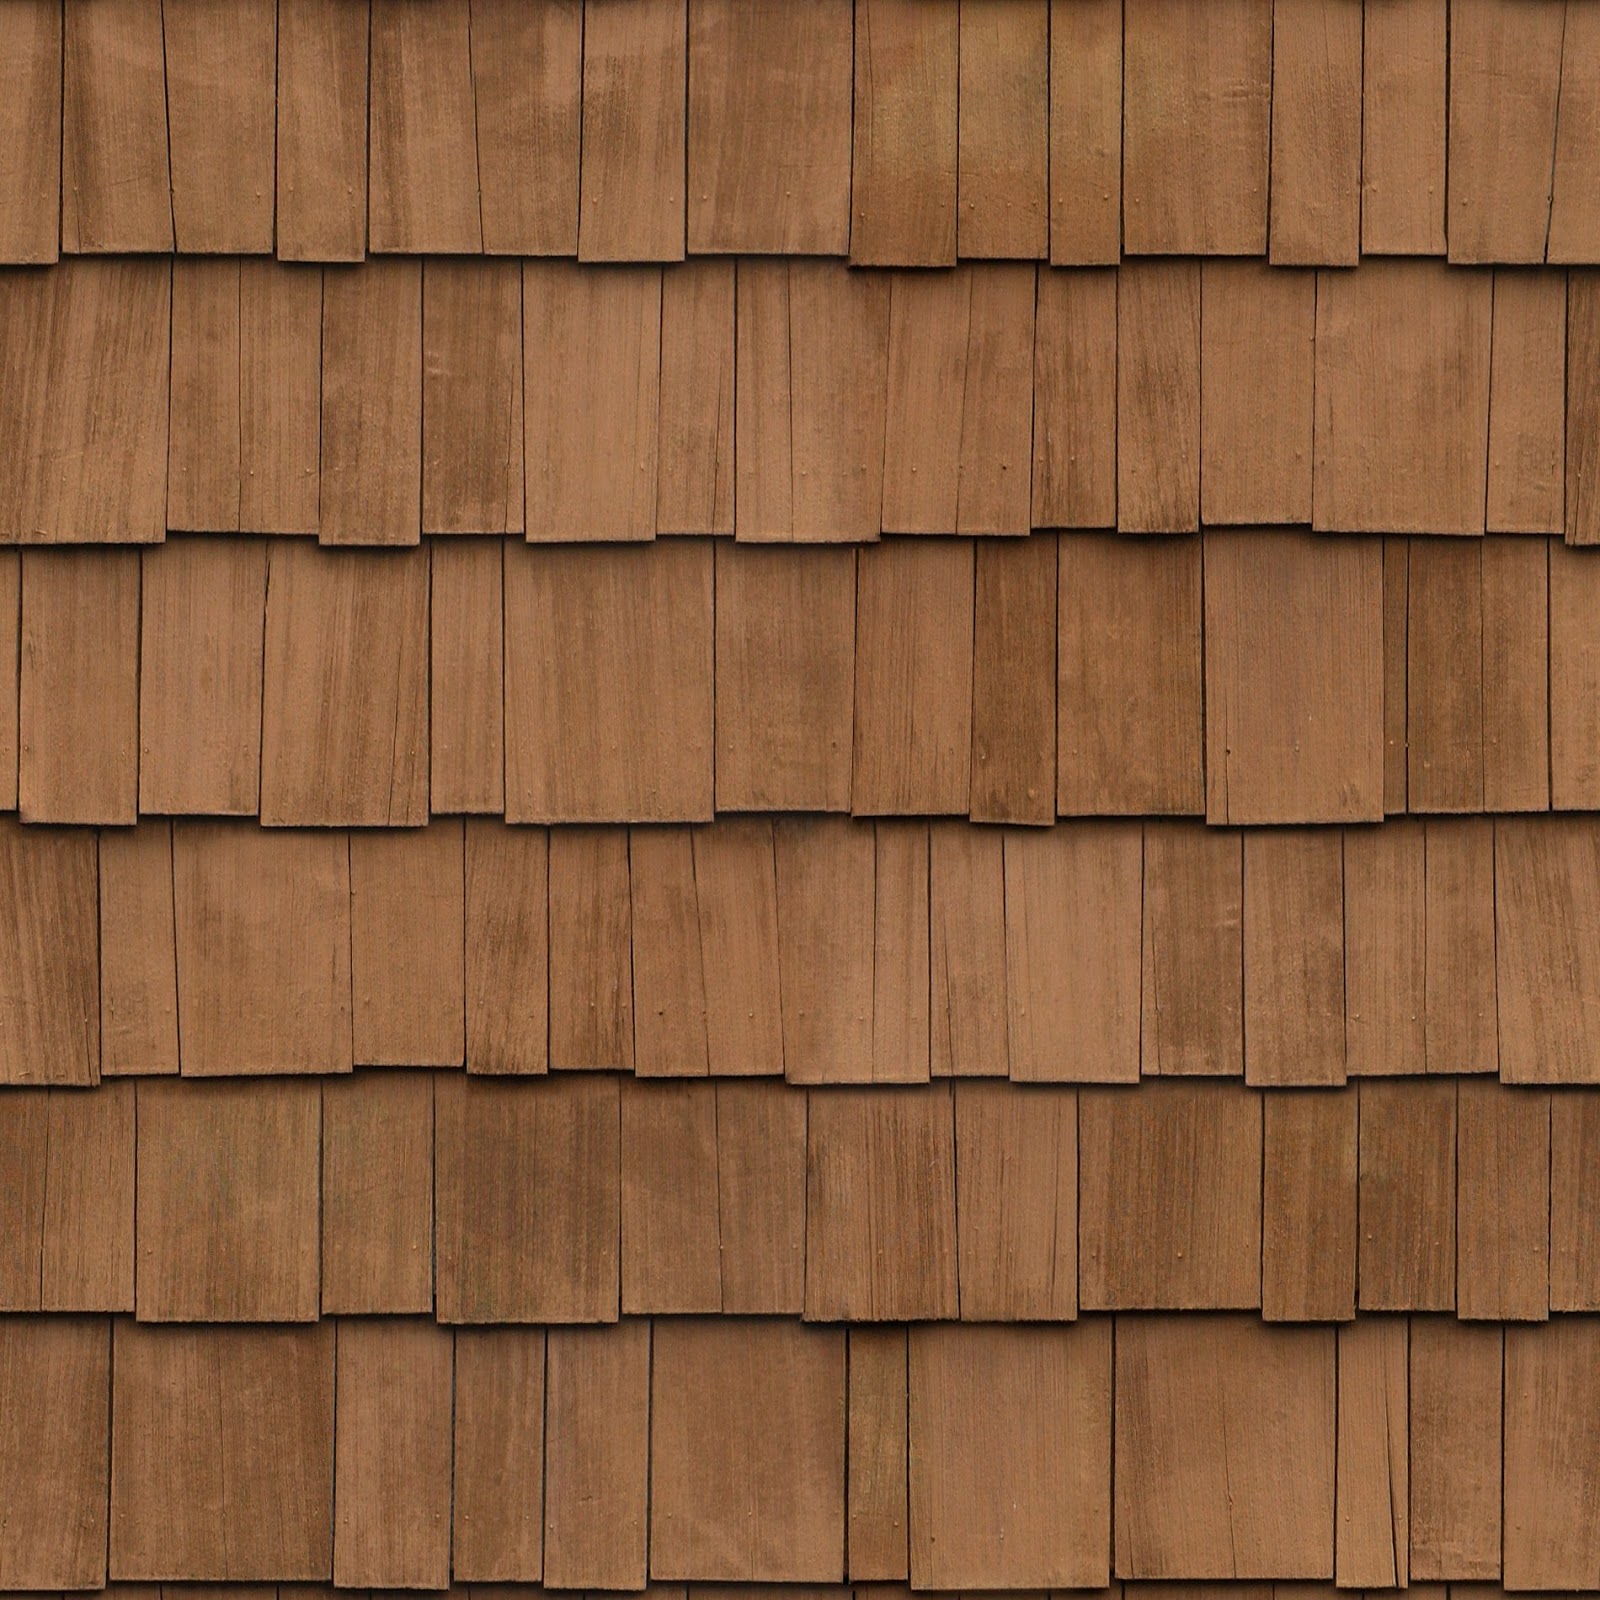 3D Model Free: [Mapping] Shingle Roof Textures